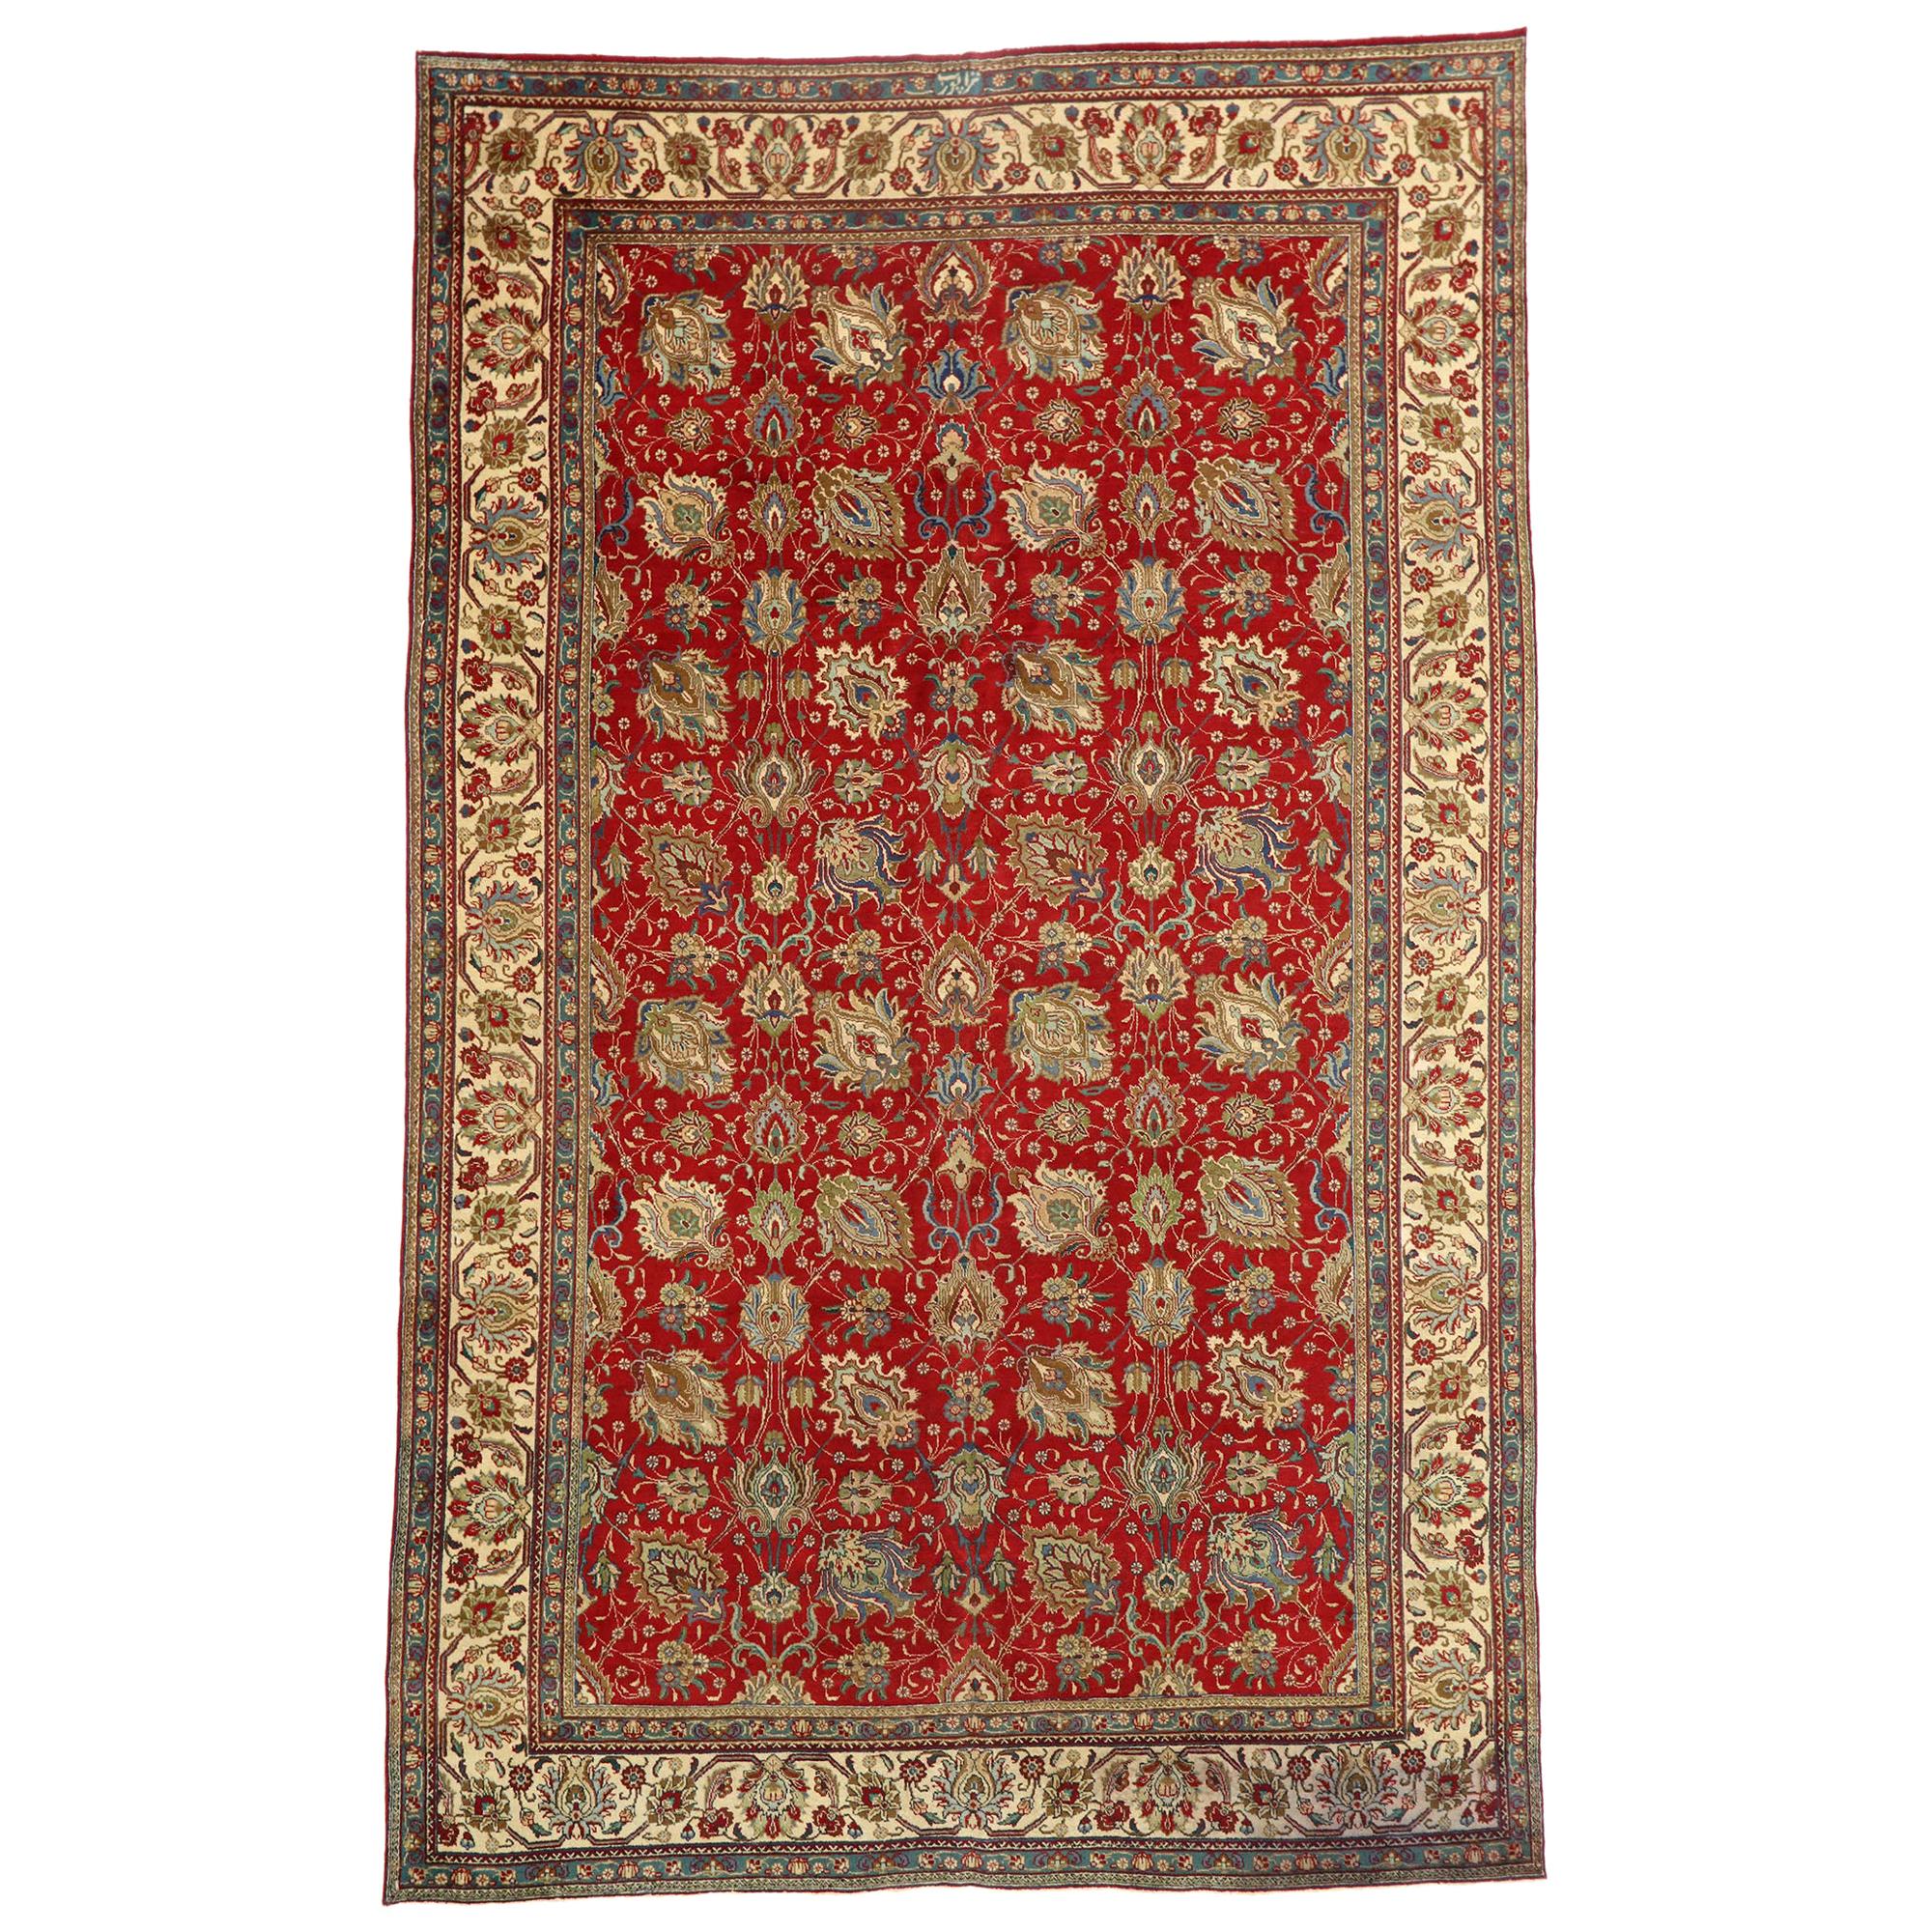 Vintage Persian Tabriz Palace Rug with Traditional Colonial and Federal Style